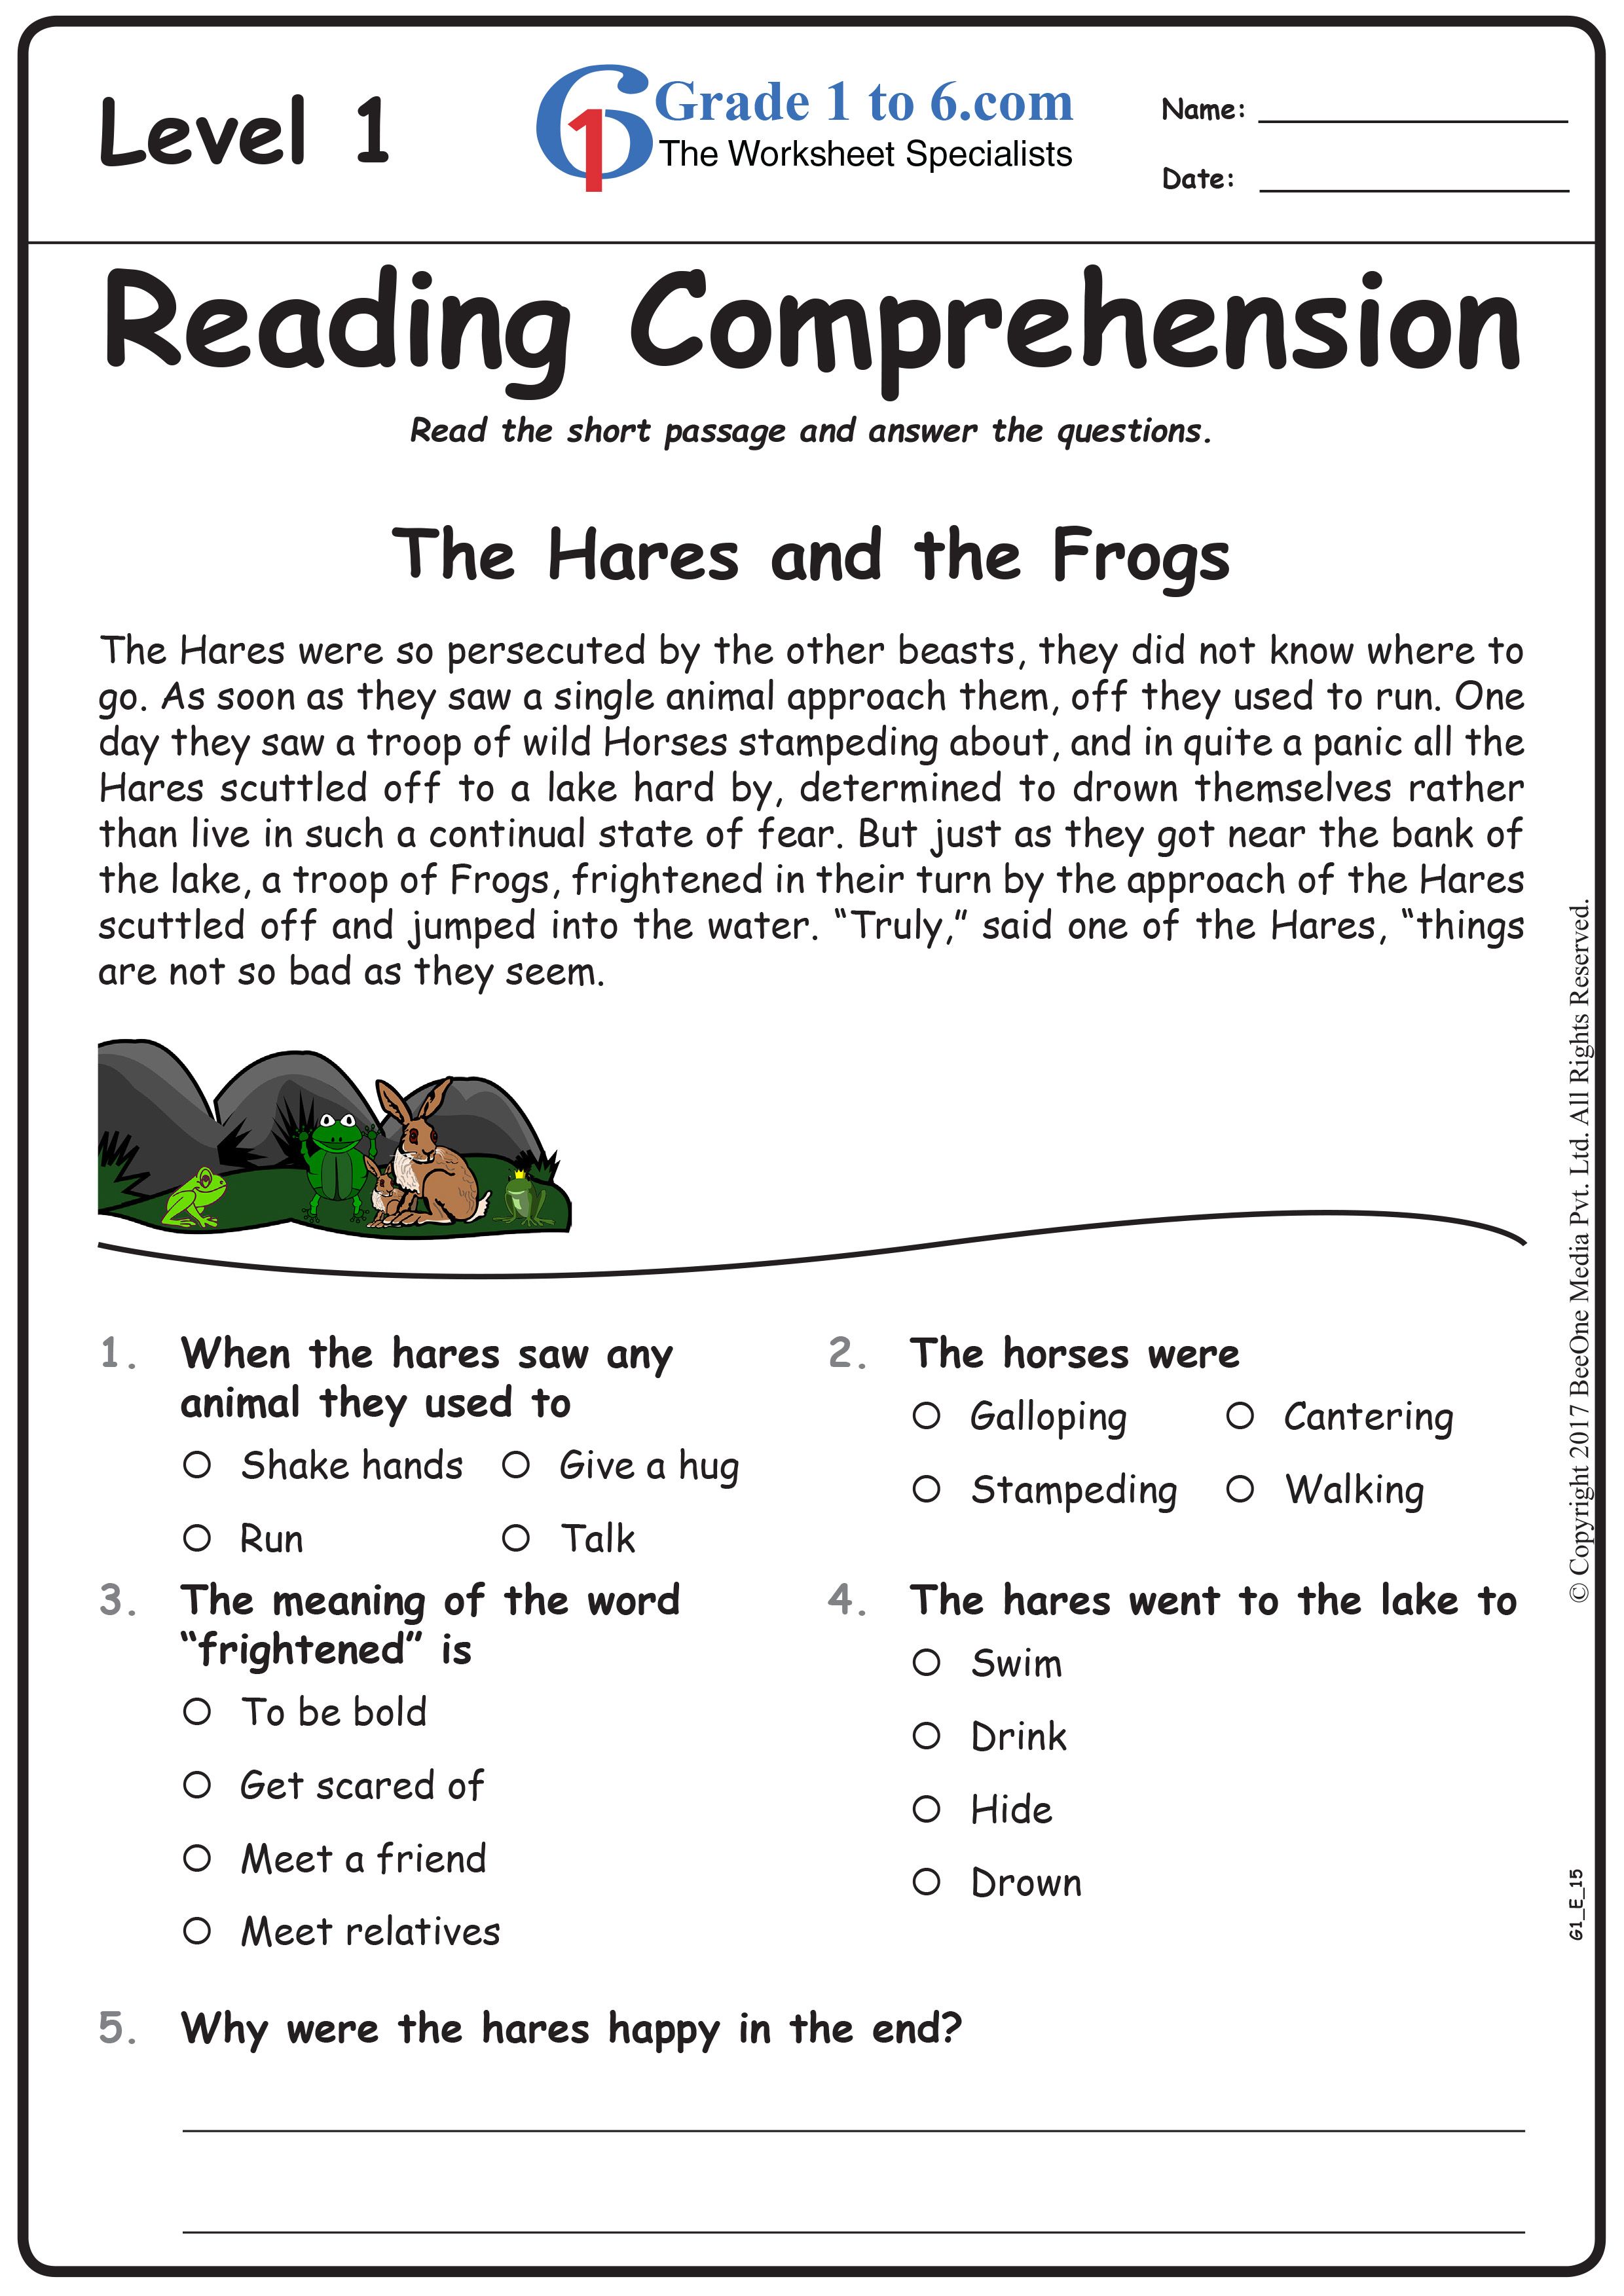 research about reading comprehension level